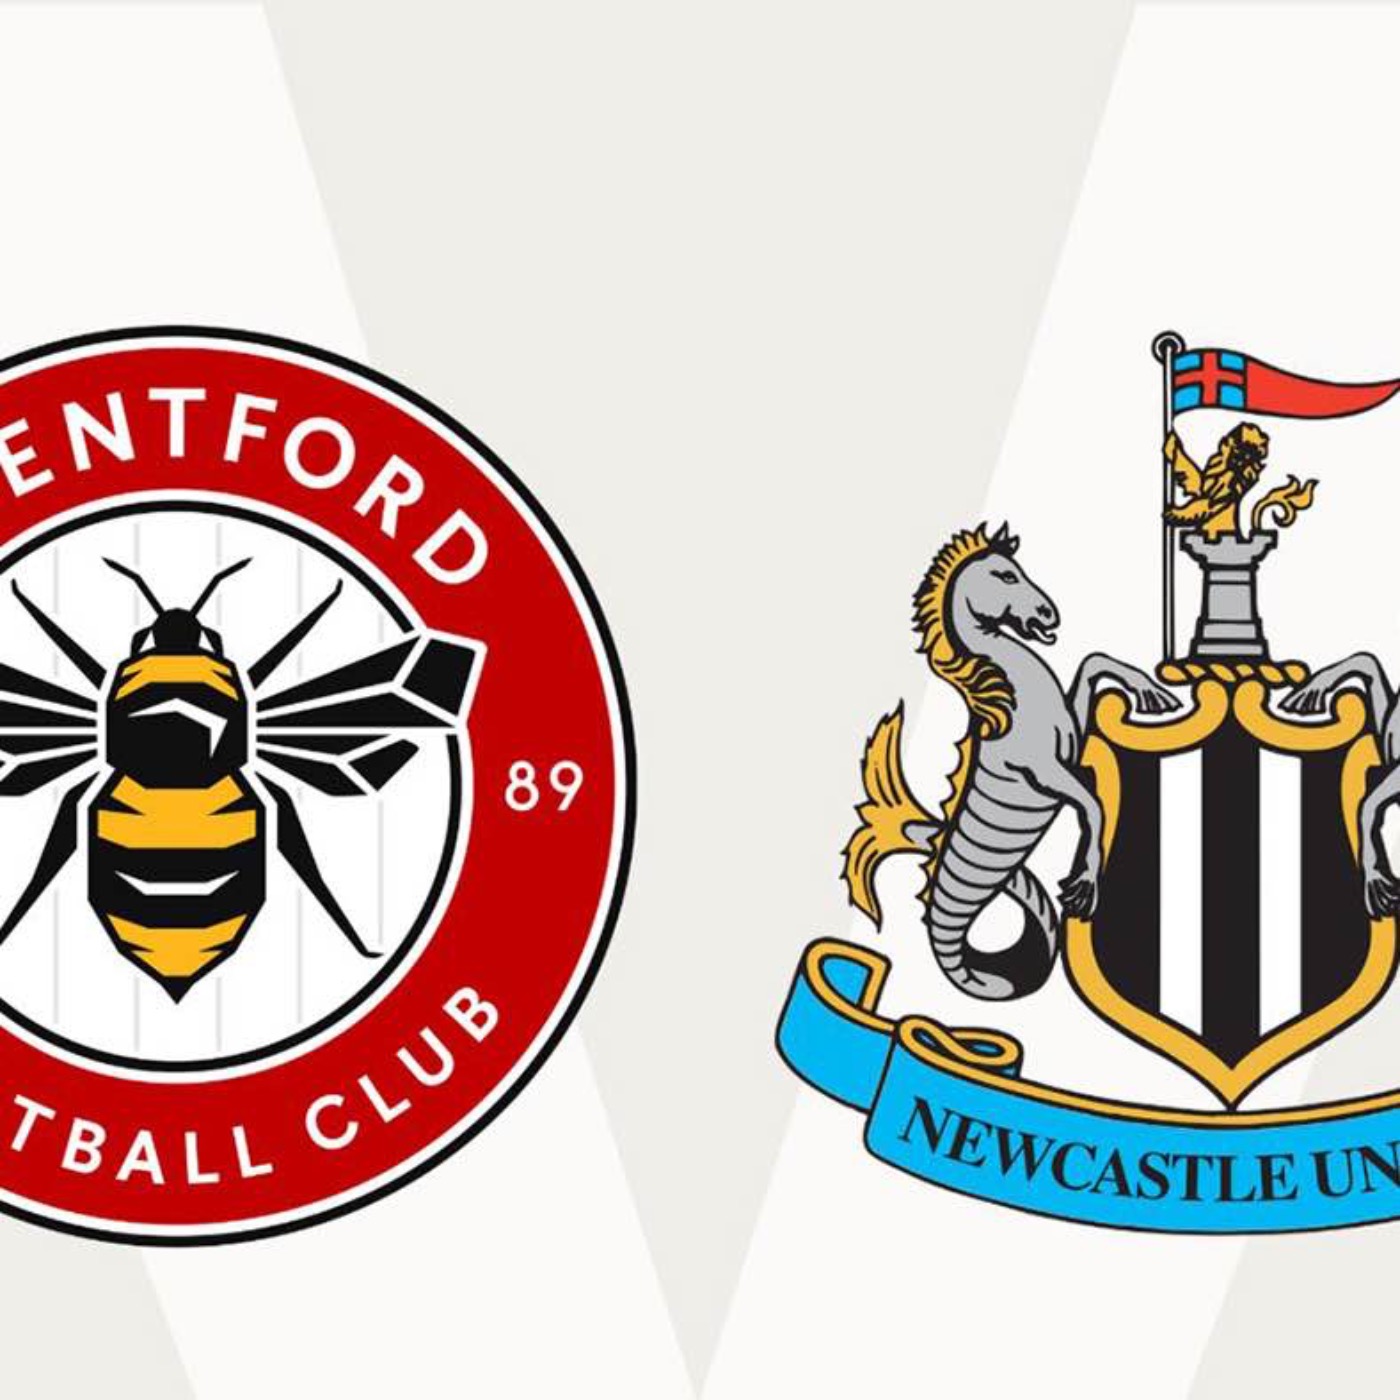 Brentford Take On In Form Newcastle - Pre Match Podcast